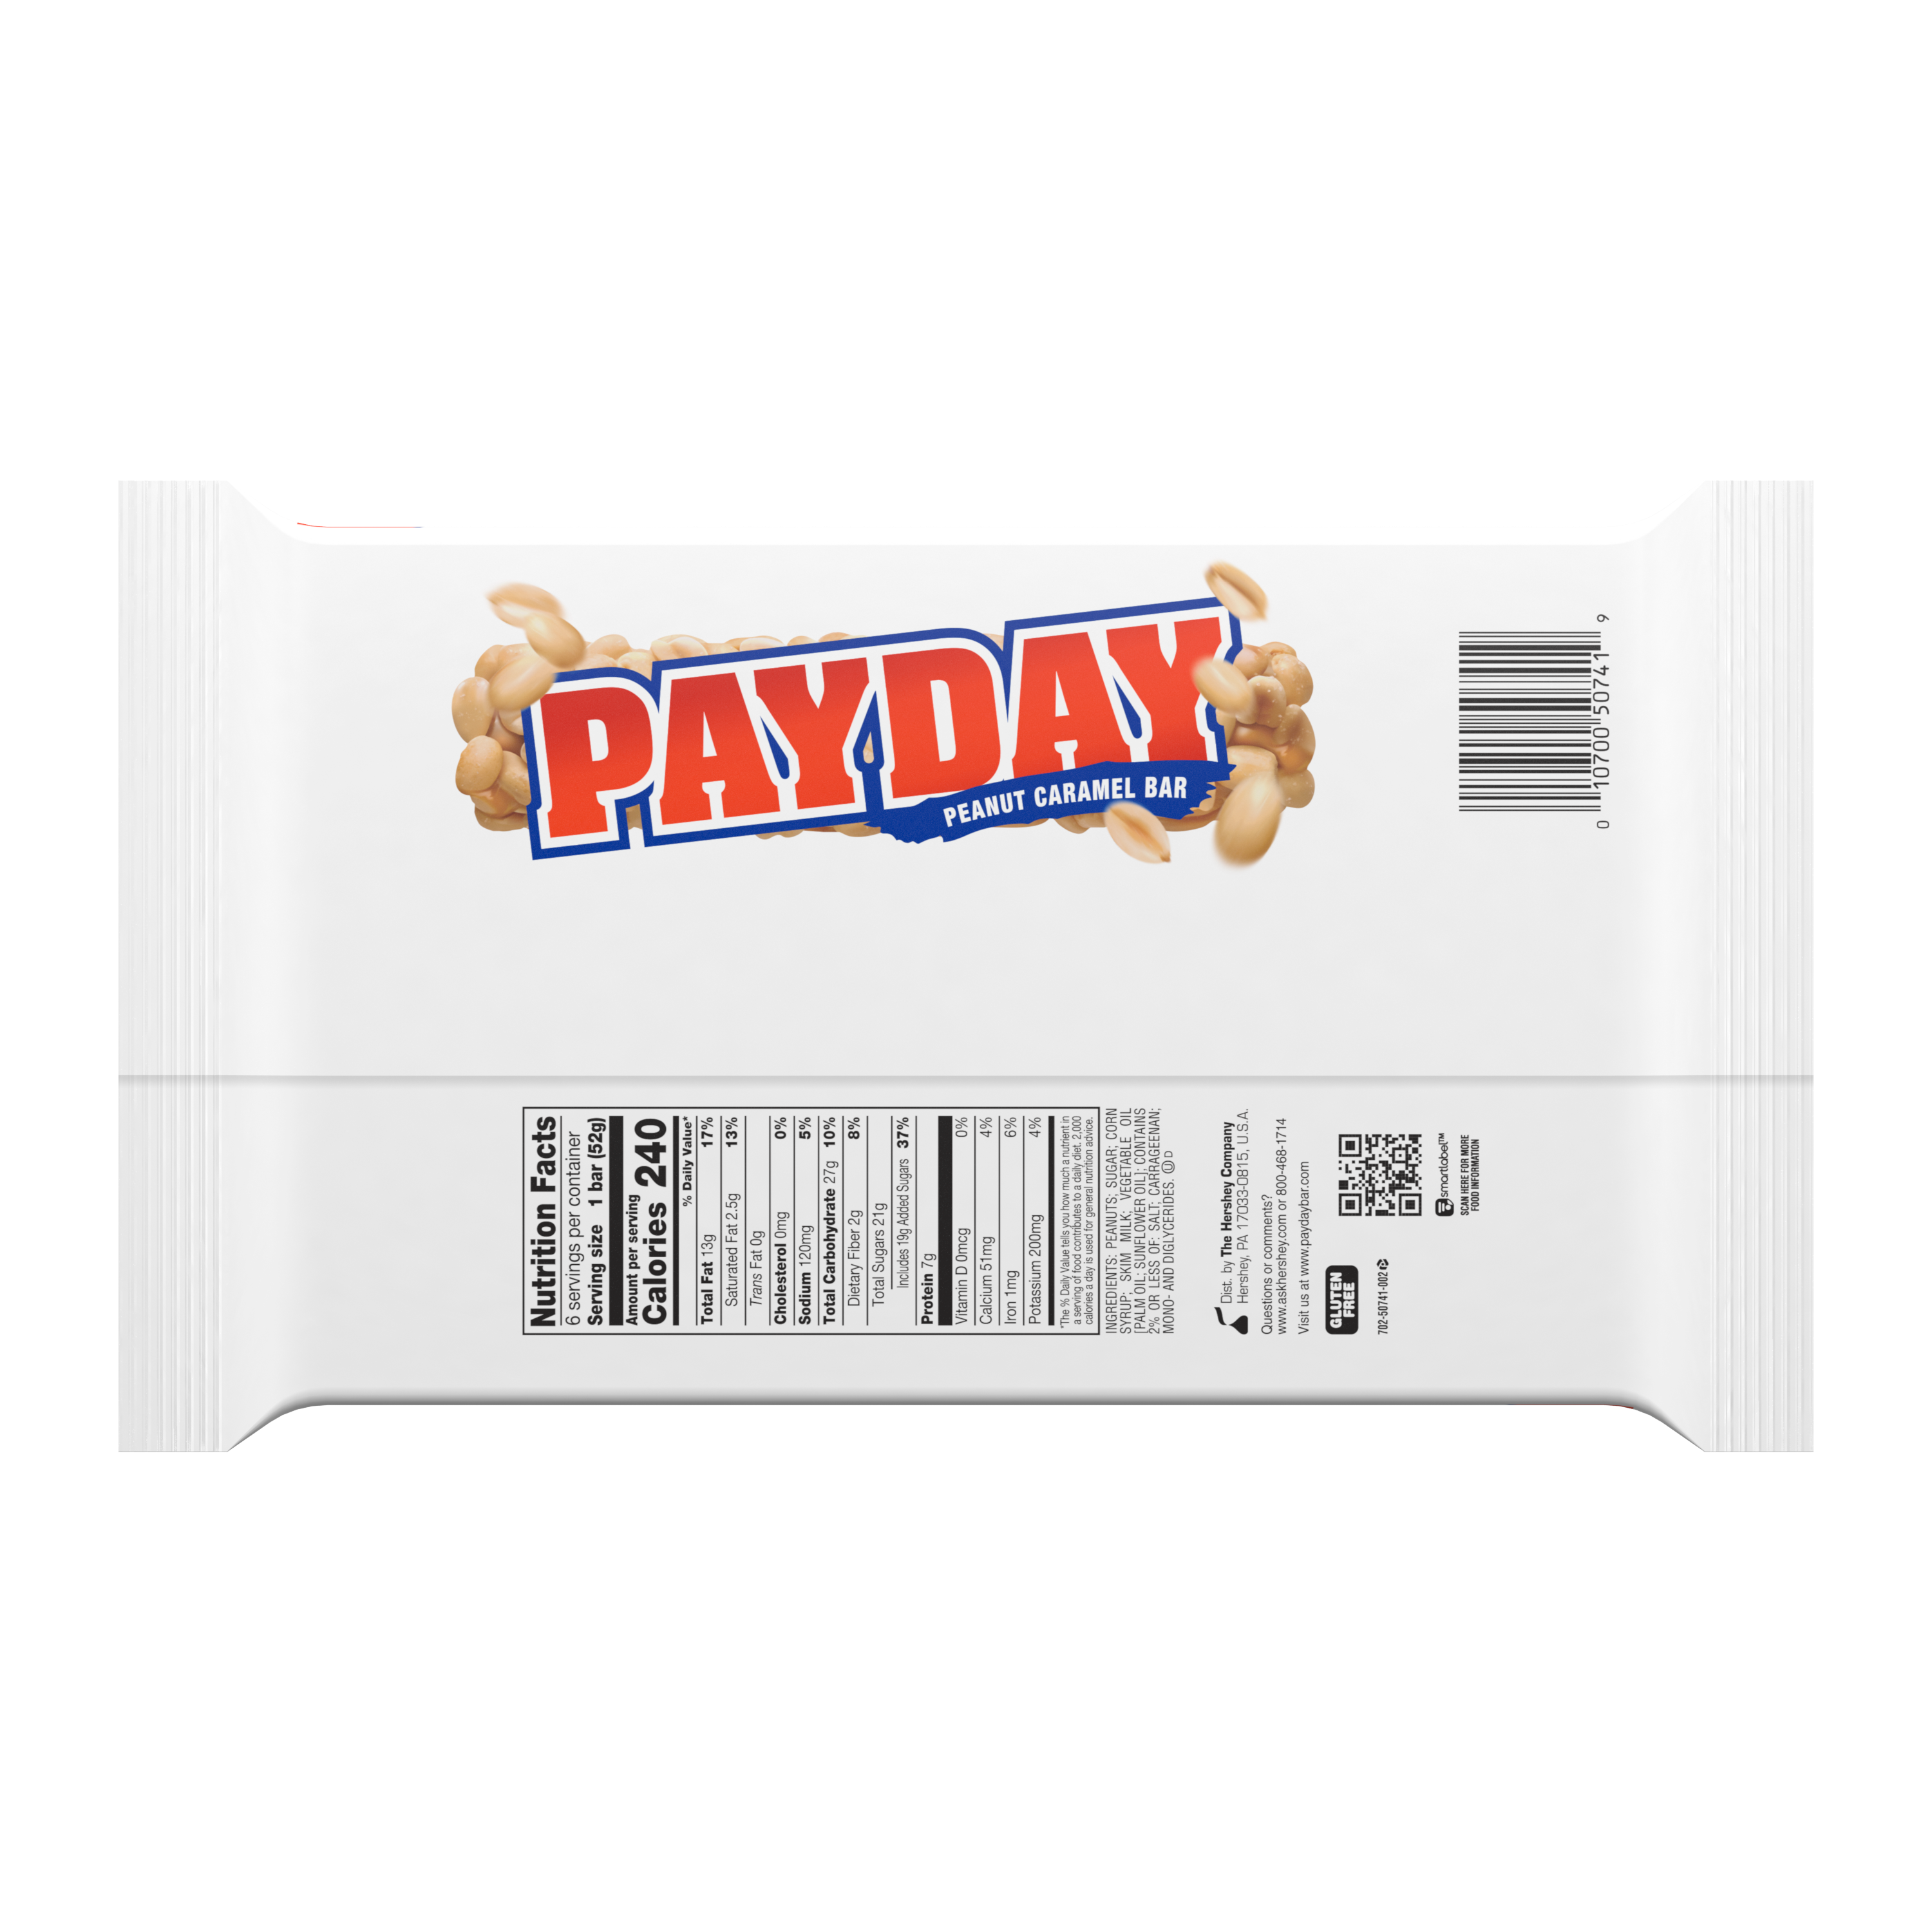 PAYDAY Peanut and Caramel Candy Bars, 11.1 oz, 6 pack - Back of Package